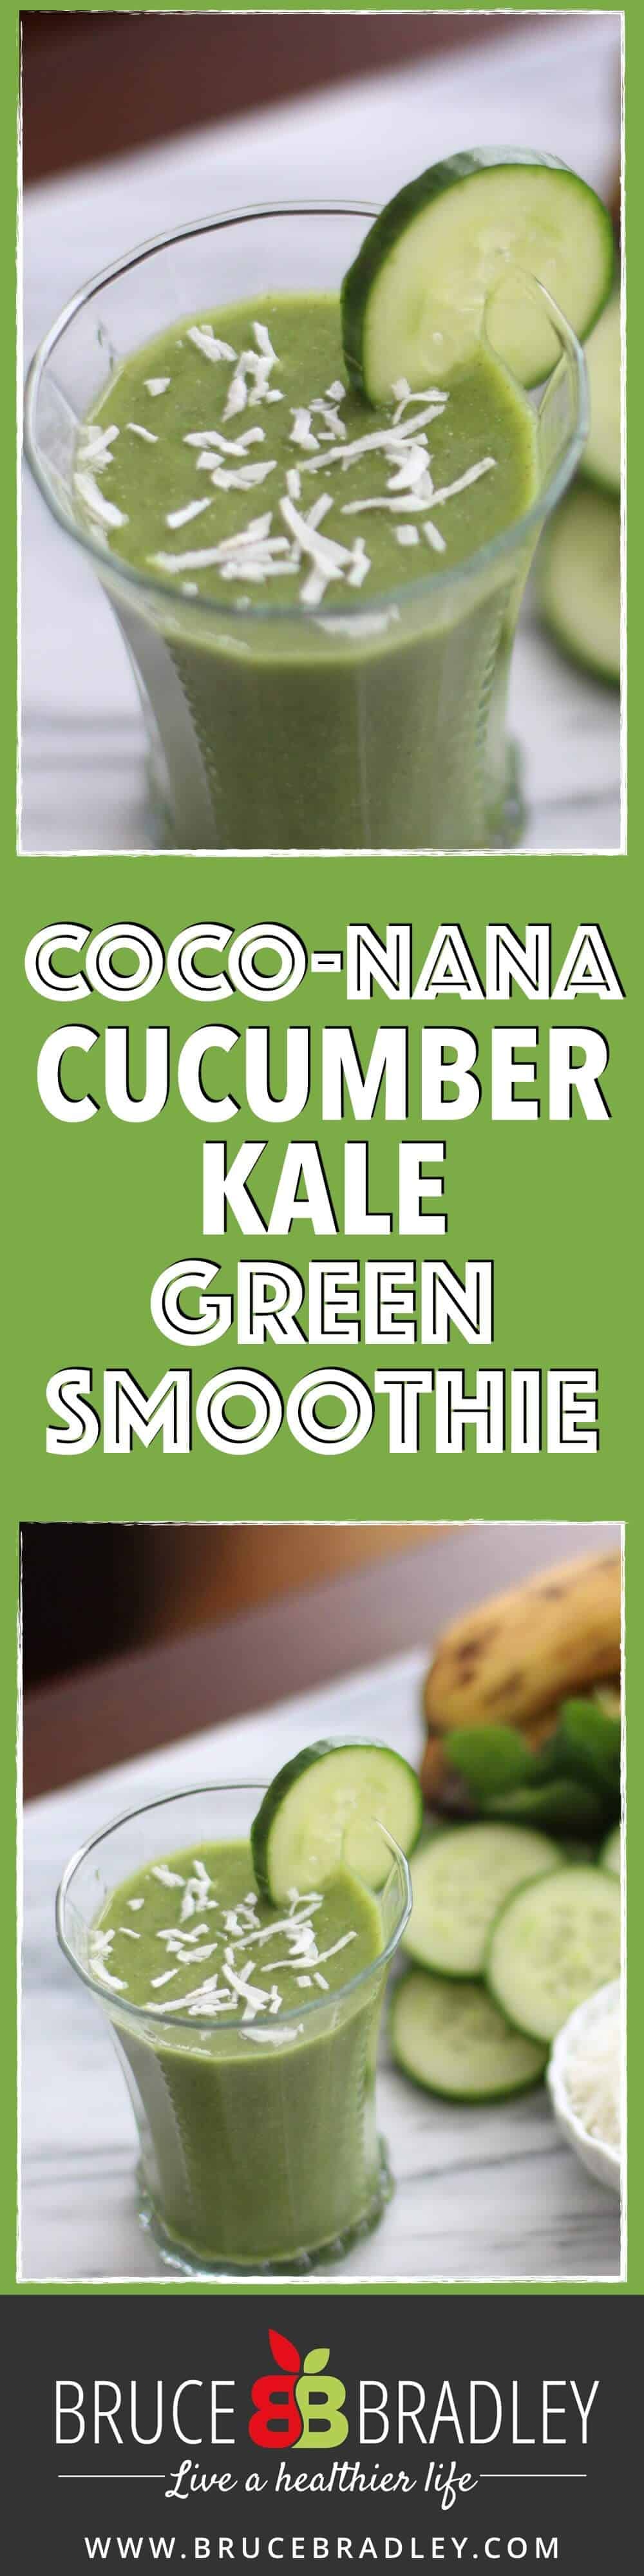 Green Smoothies Like This Coco-Nana Cucumber Kale Green Smoothie Are A Delicious Way To Get More Greens In Your Diet! Made With Kale, Cucumbers, Bananas, Coconut, And Chia Seeds, This Is One Great Way To Eat And Drink Good Stuff!